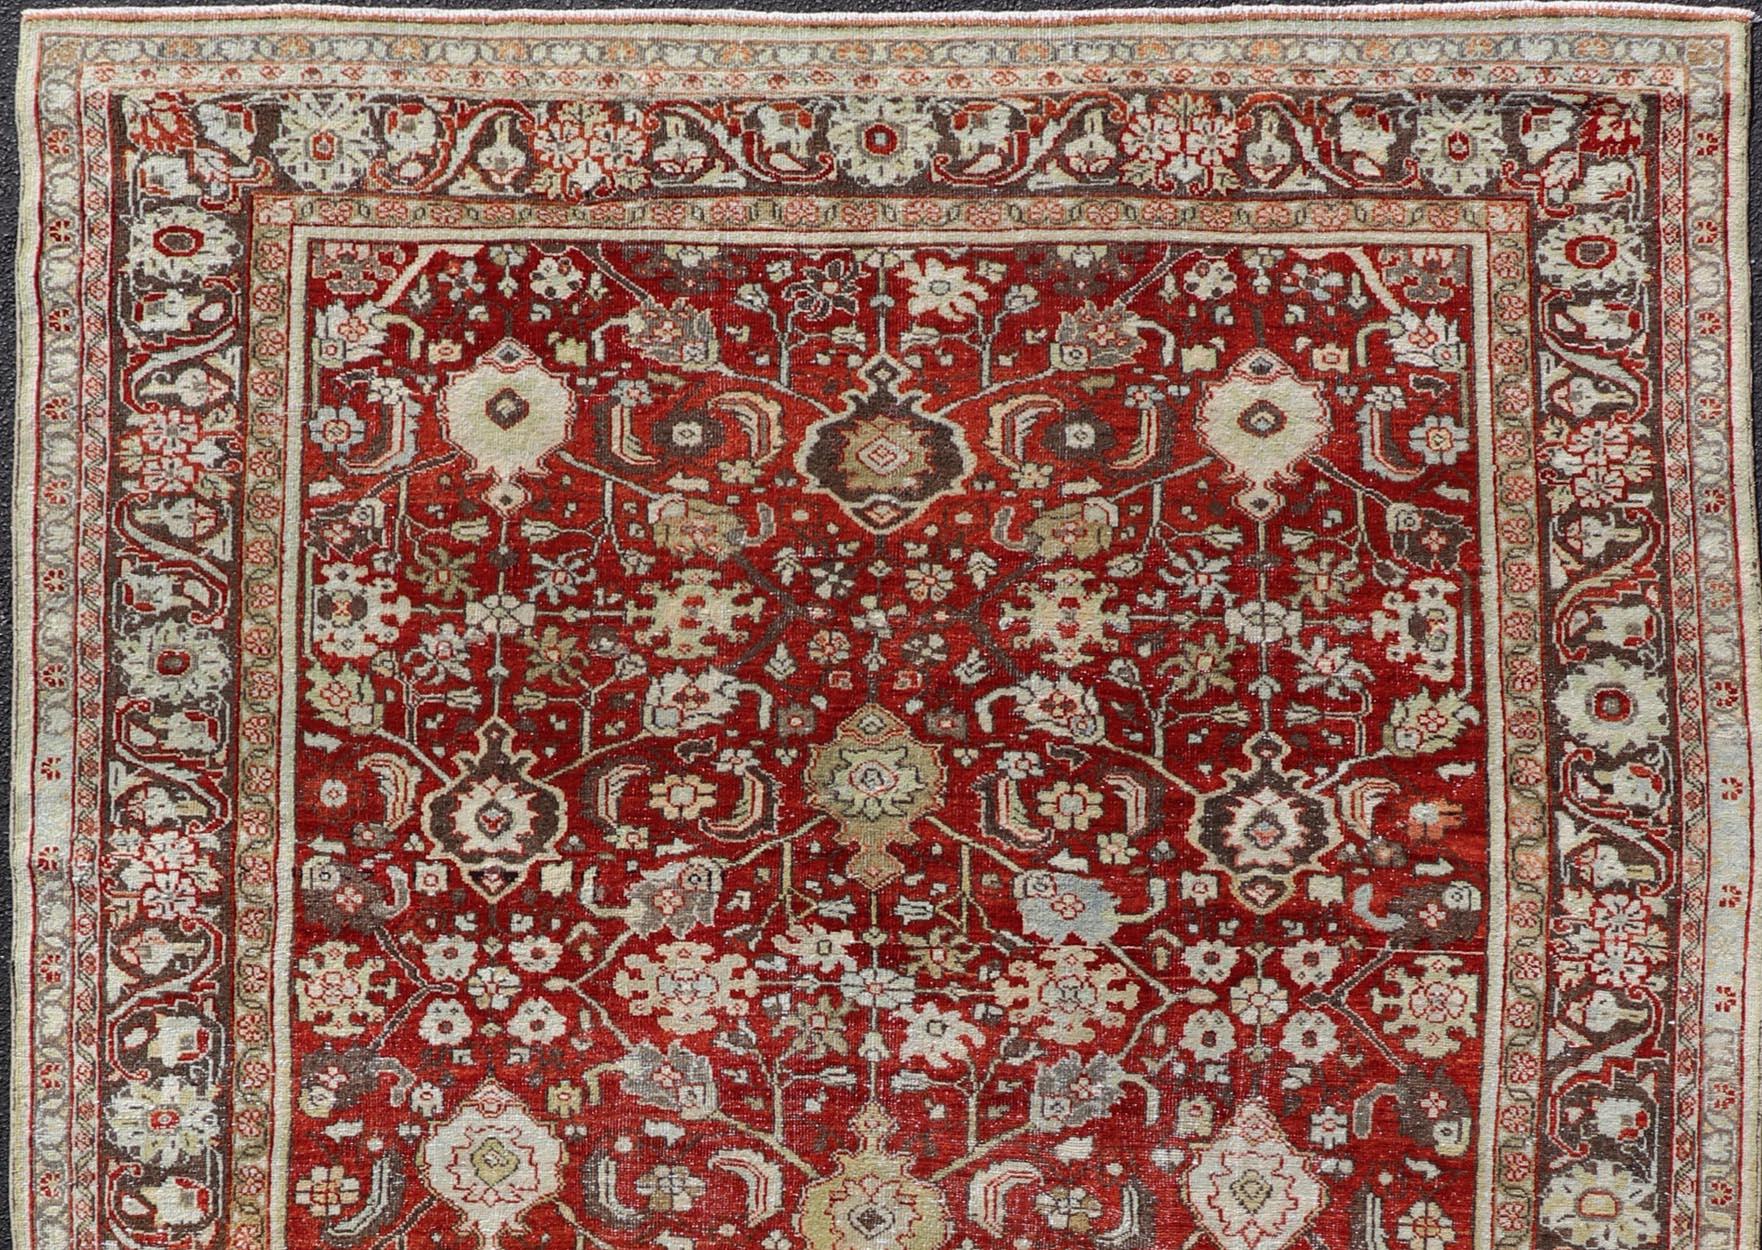 Vintage Sultanabad-Mahal rug on a red background with all over floral design. Keivan Woven Arts / rug PTA-200704, country of origin / type: Persian / Sultanabad-Mahal, circa Mid-20th Century.

Measures: 7'1 x 11'7.